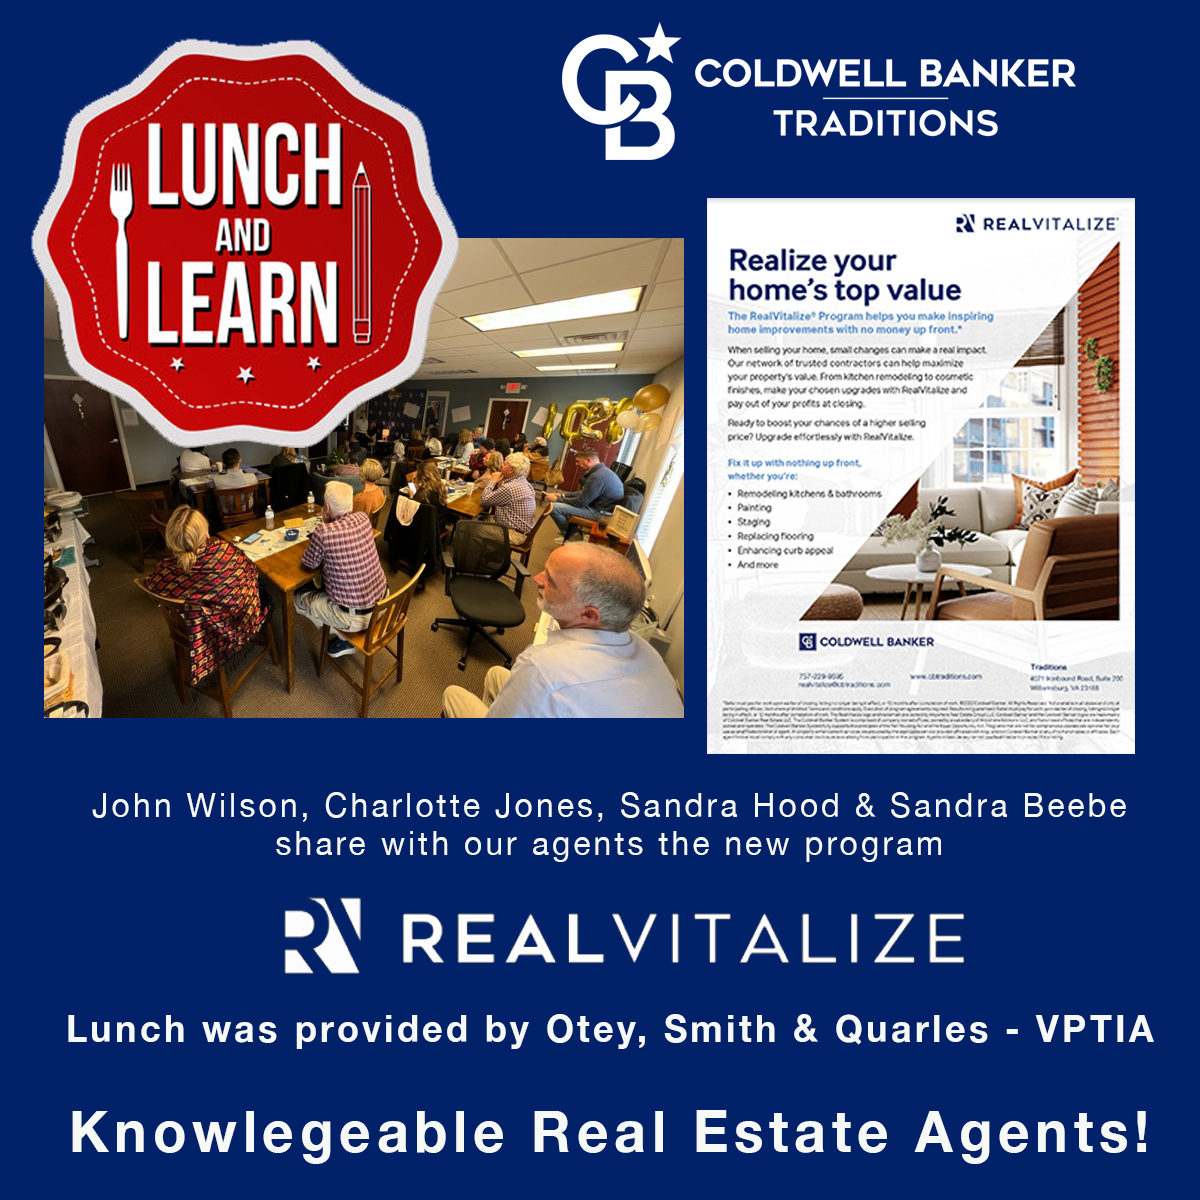 Coldwell Banker Traditions provides monthly Lunch & Learn opportunities to keep our agents up to date on everything Real Estate! This month's Topic was 'RealVitalize' a new program exclusively with Coldwell Banker. 
#realestatelearning #coldwellbanker